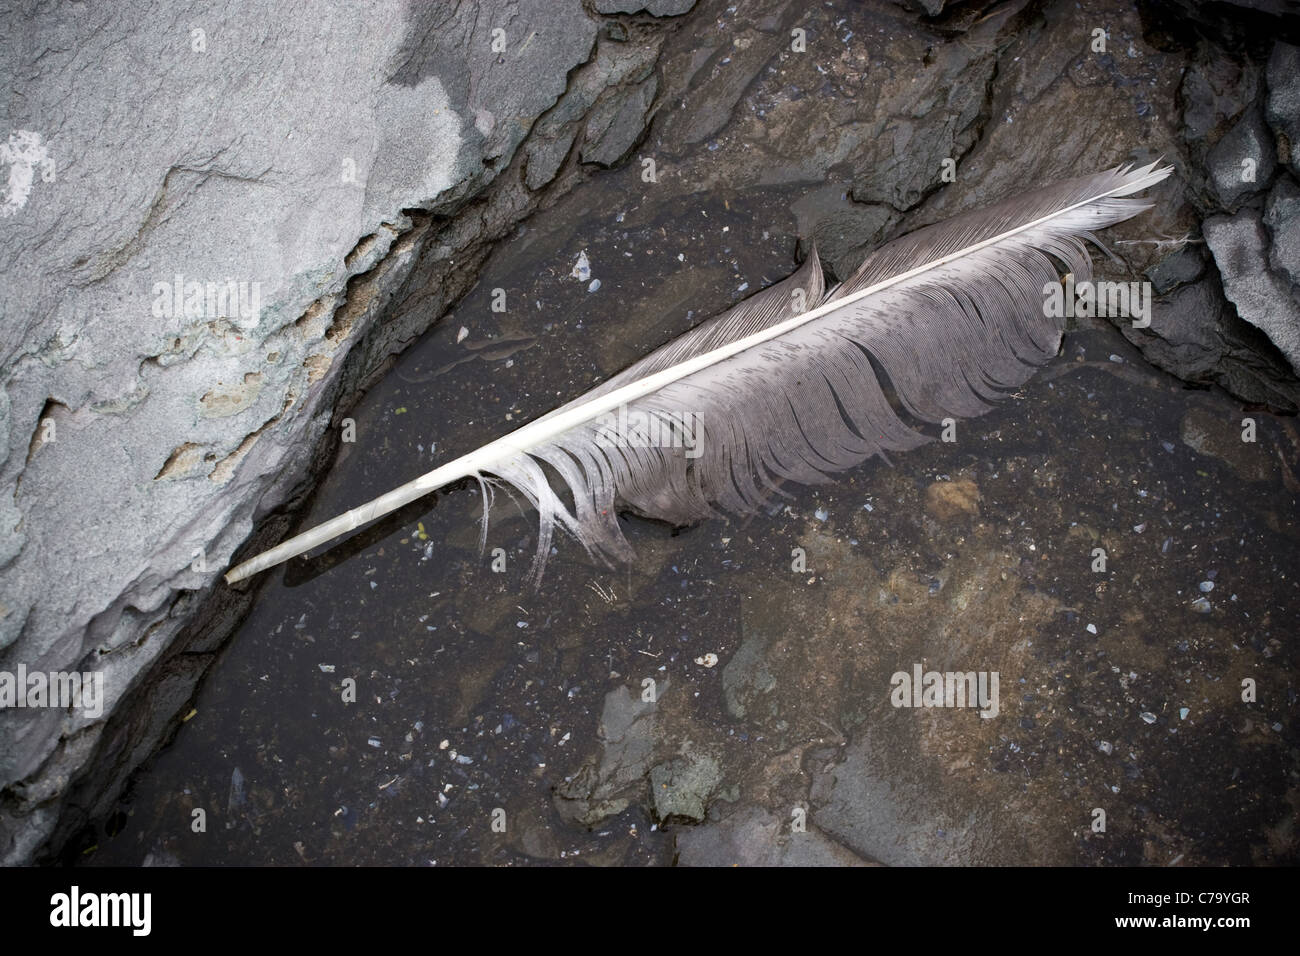 A single seagull feather sitting in a shallow puddle of water on the rocks. This makes a great beach background. Stock Photo